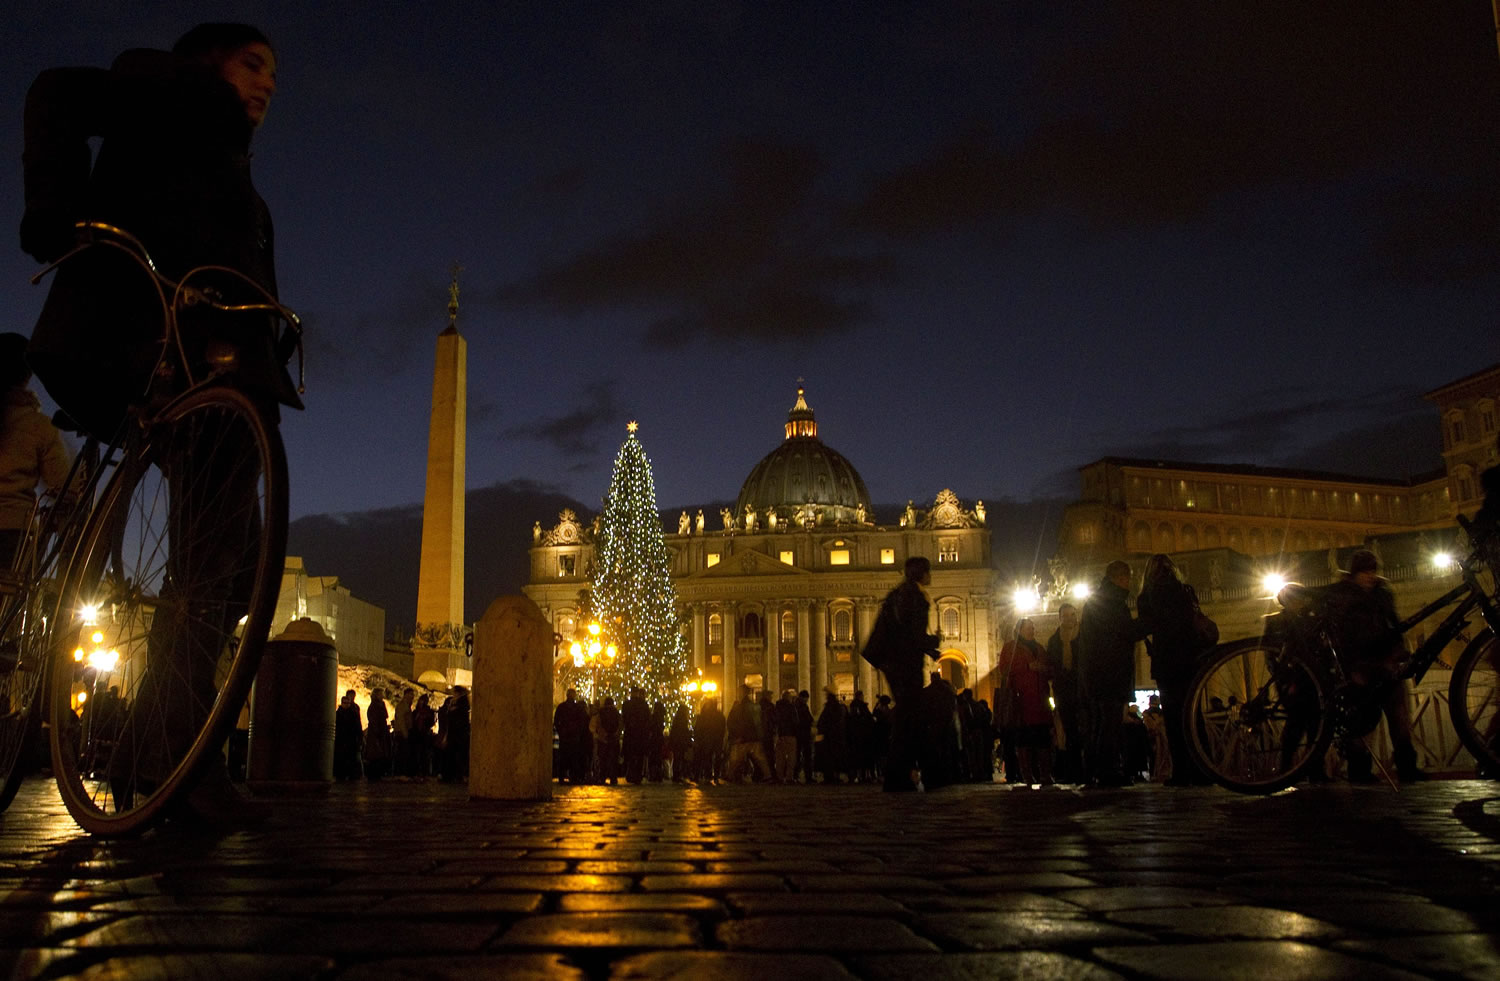 Faithful gather in St. Peter's Square at the Vatican after the unveiling of the nativity scene on Saturday.